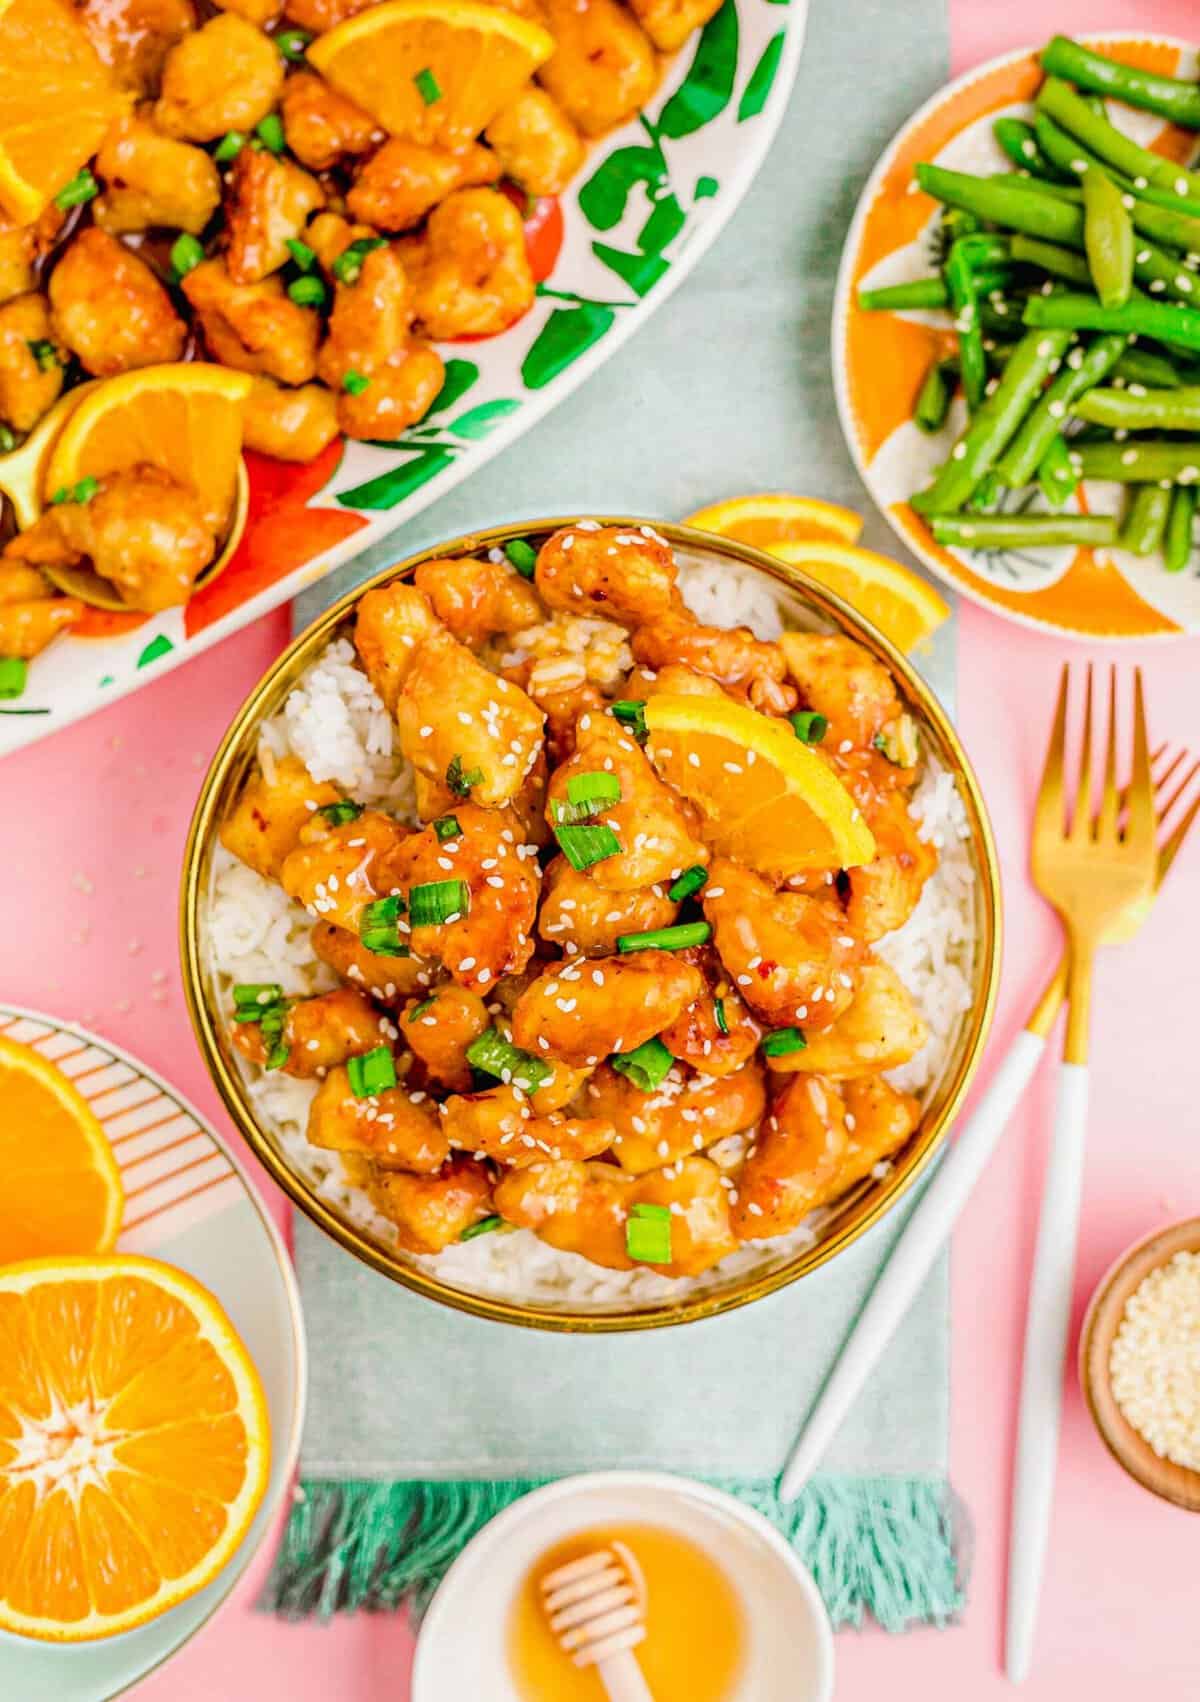 Orange chicken served over rice with green beans on the side